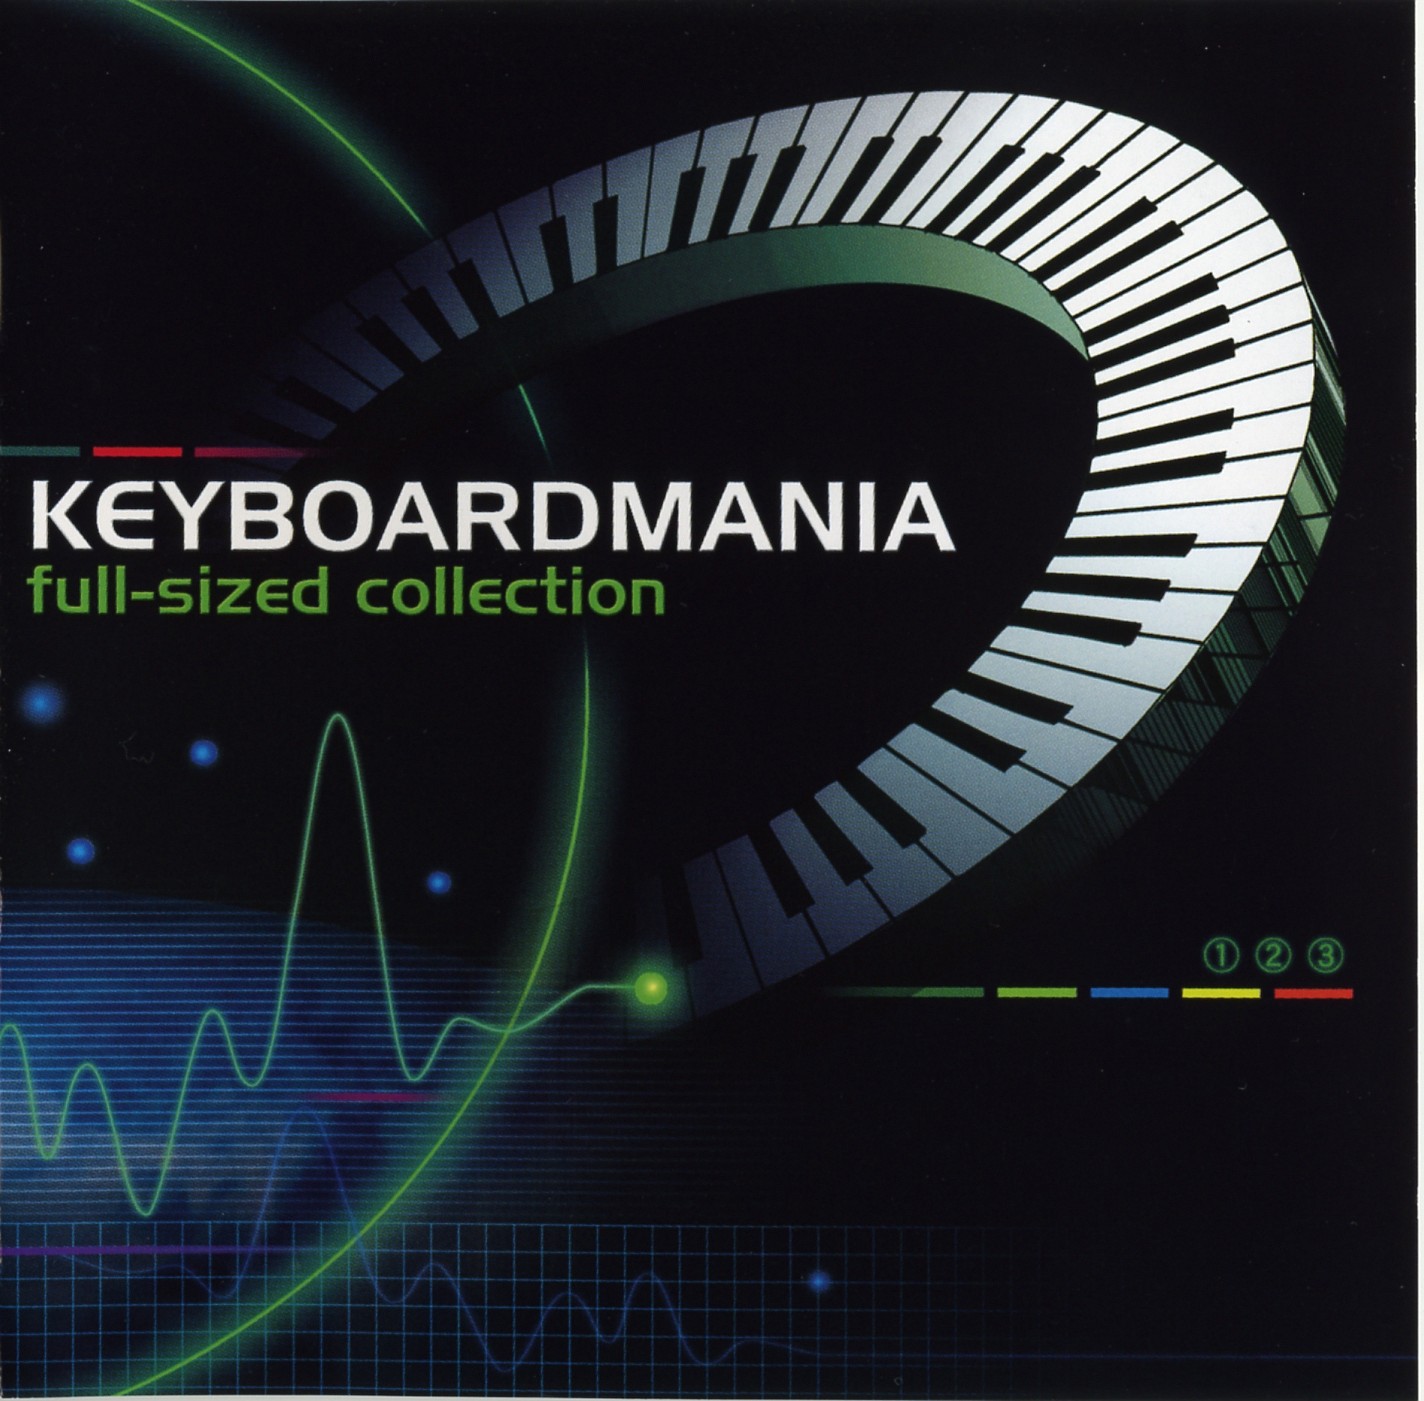 KEYBOARDMANIA full-sized collection (2001) MP3 - Download KEYBOARDMANIA full -sized collection (2001) Soundtracks for FREE!